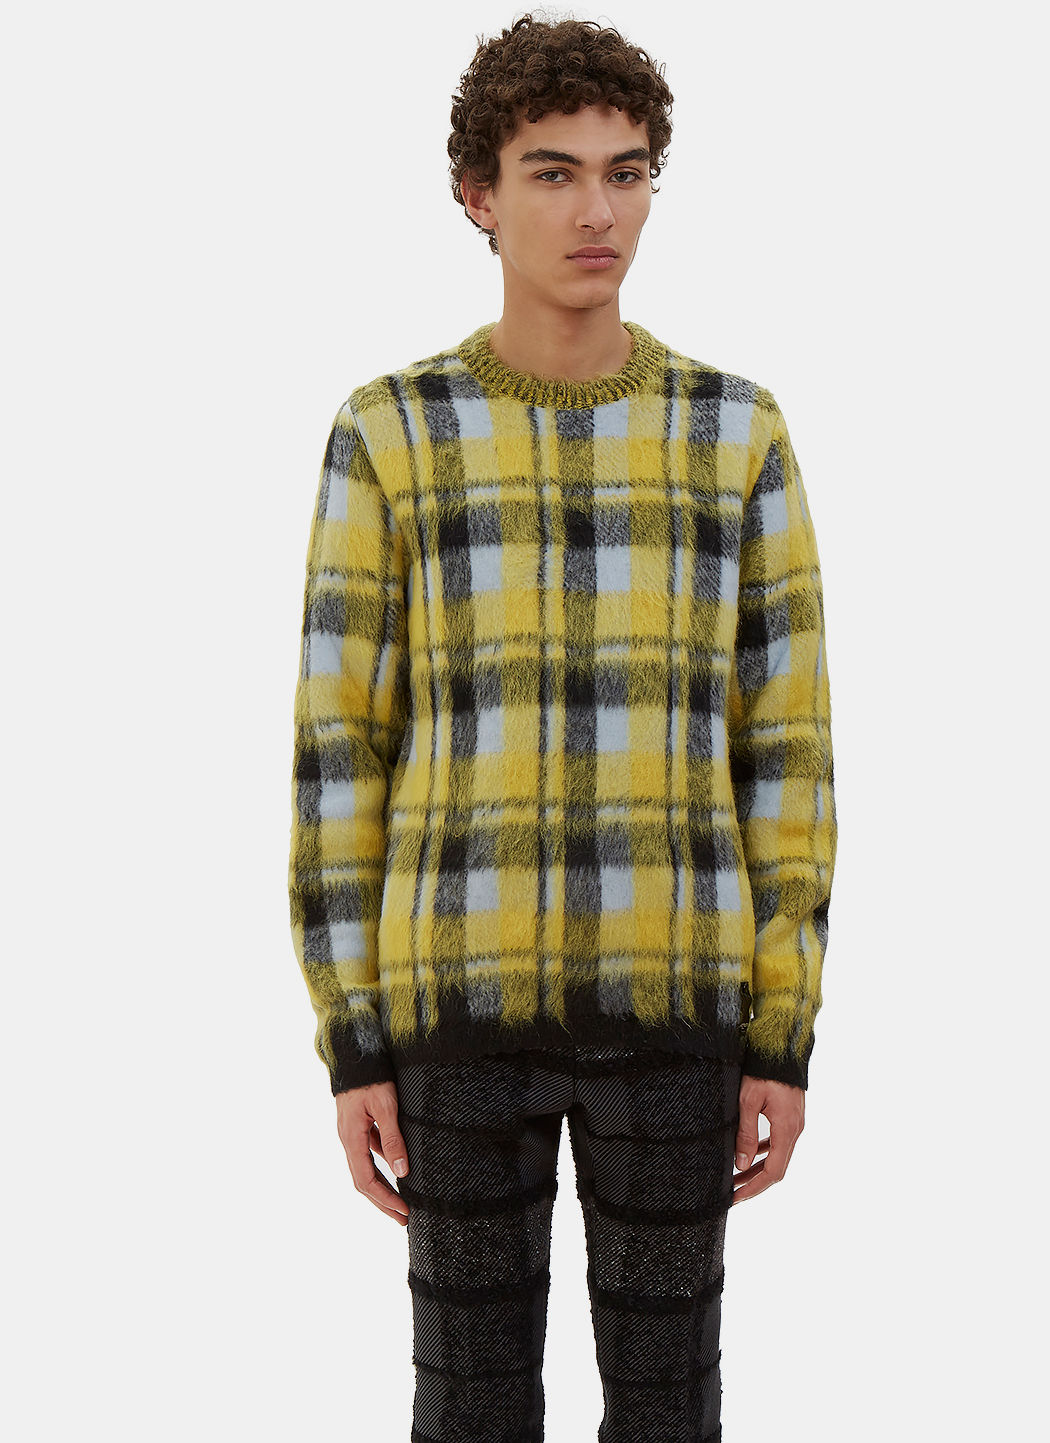 Fendi Men's Checked Hairy Knit Crew Neck Sweater In Yellow, Blue And